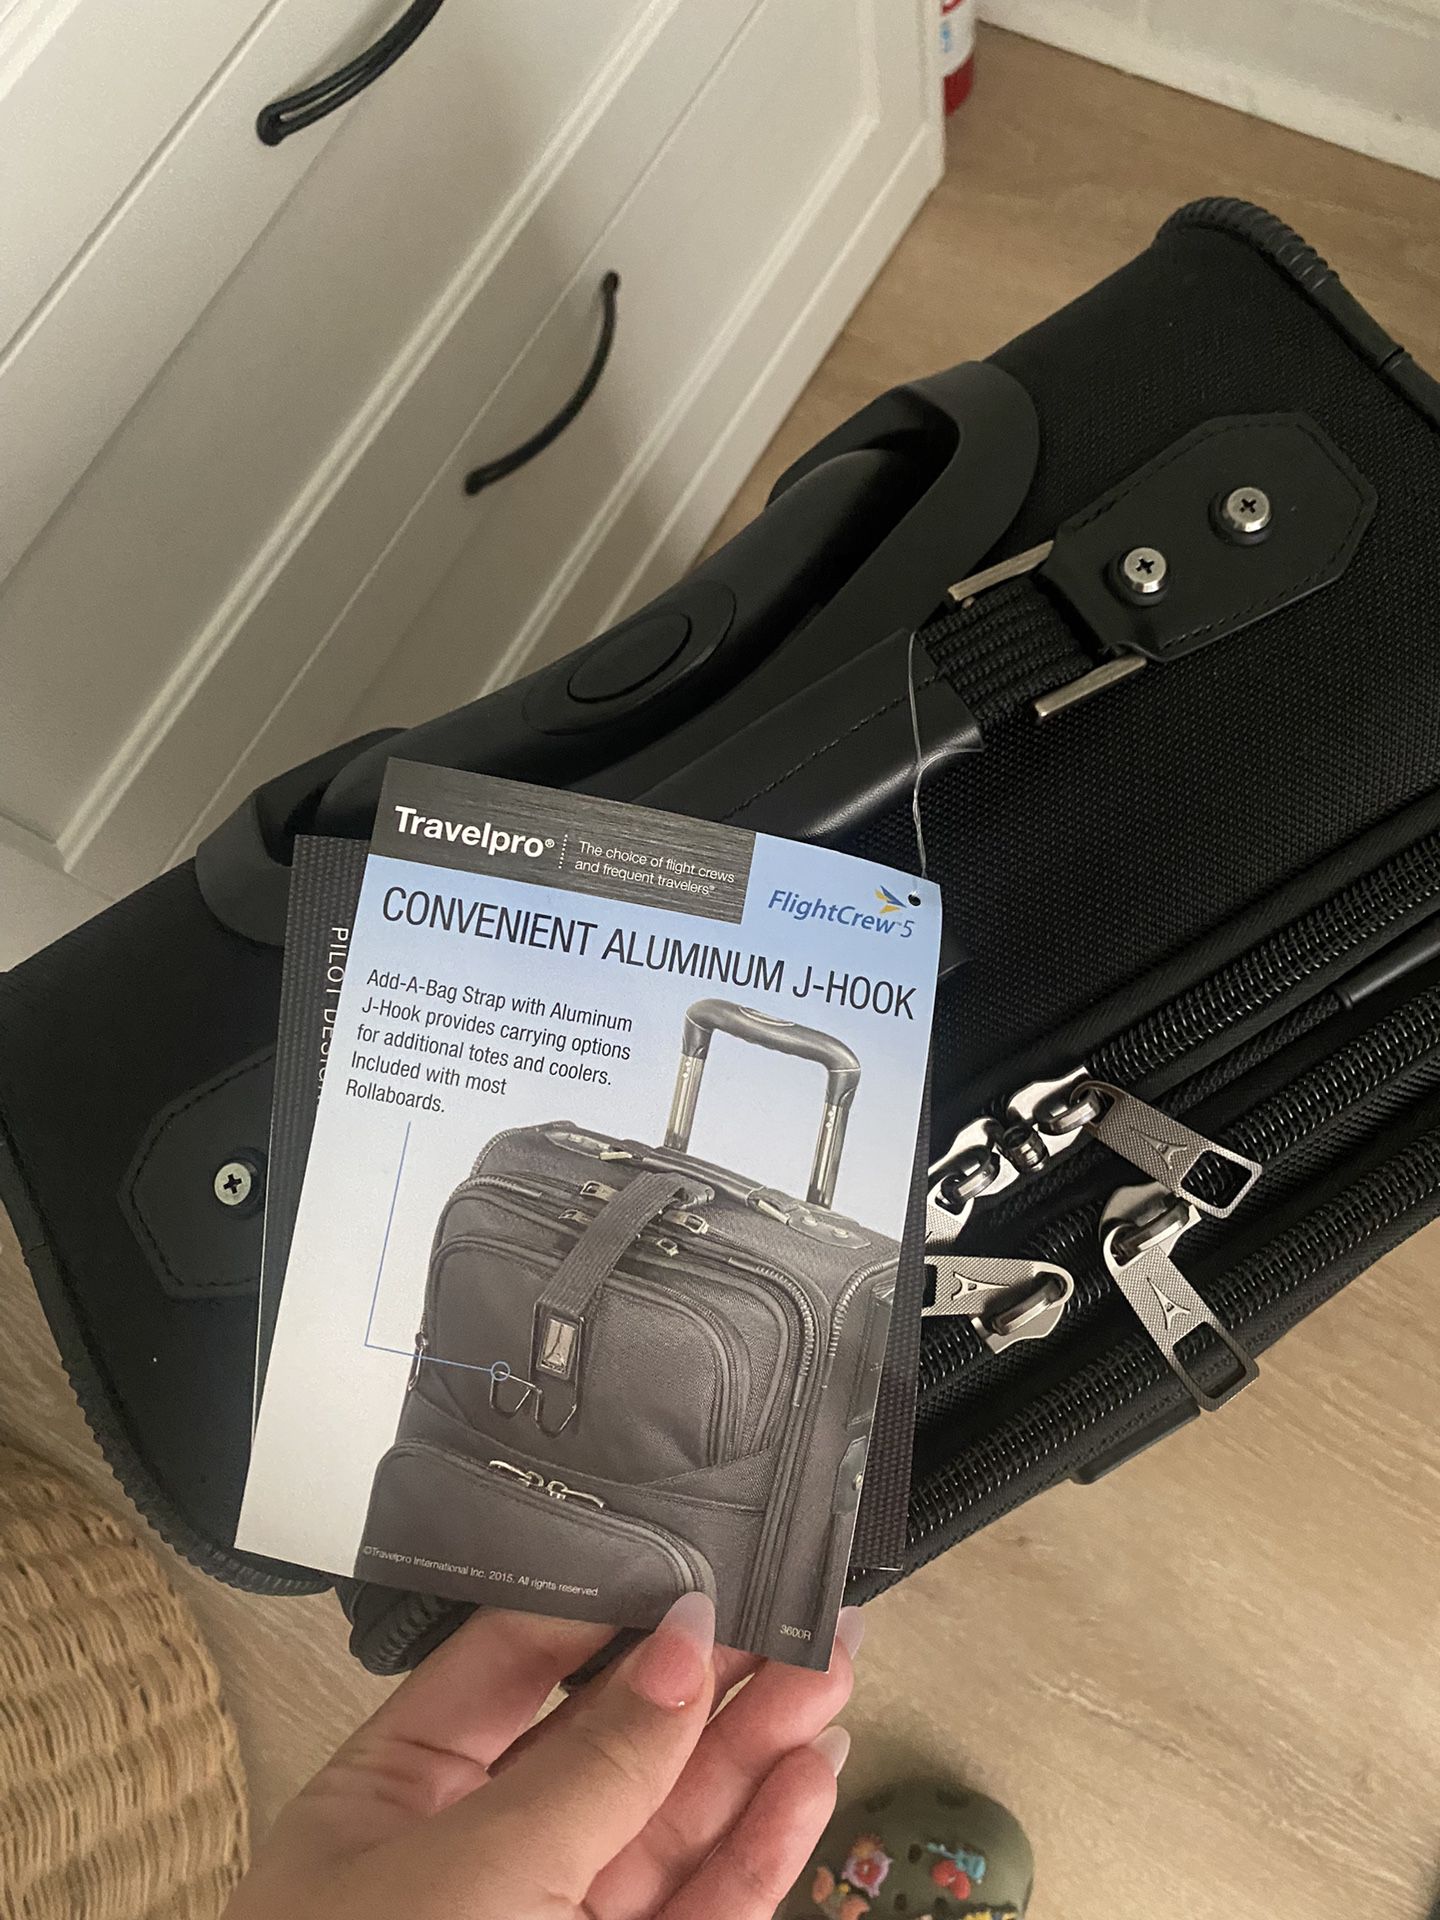 Travel Pro 22 Luggage for Sale in Norwalk, CA - OfferUp